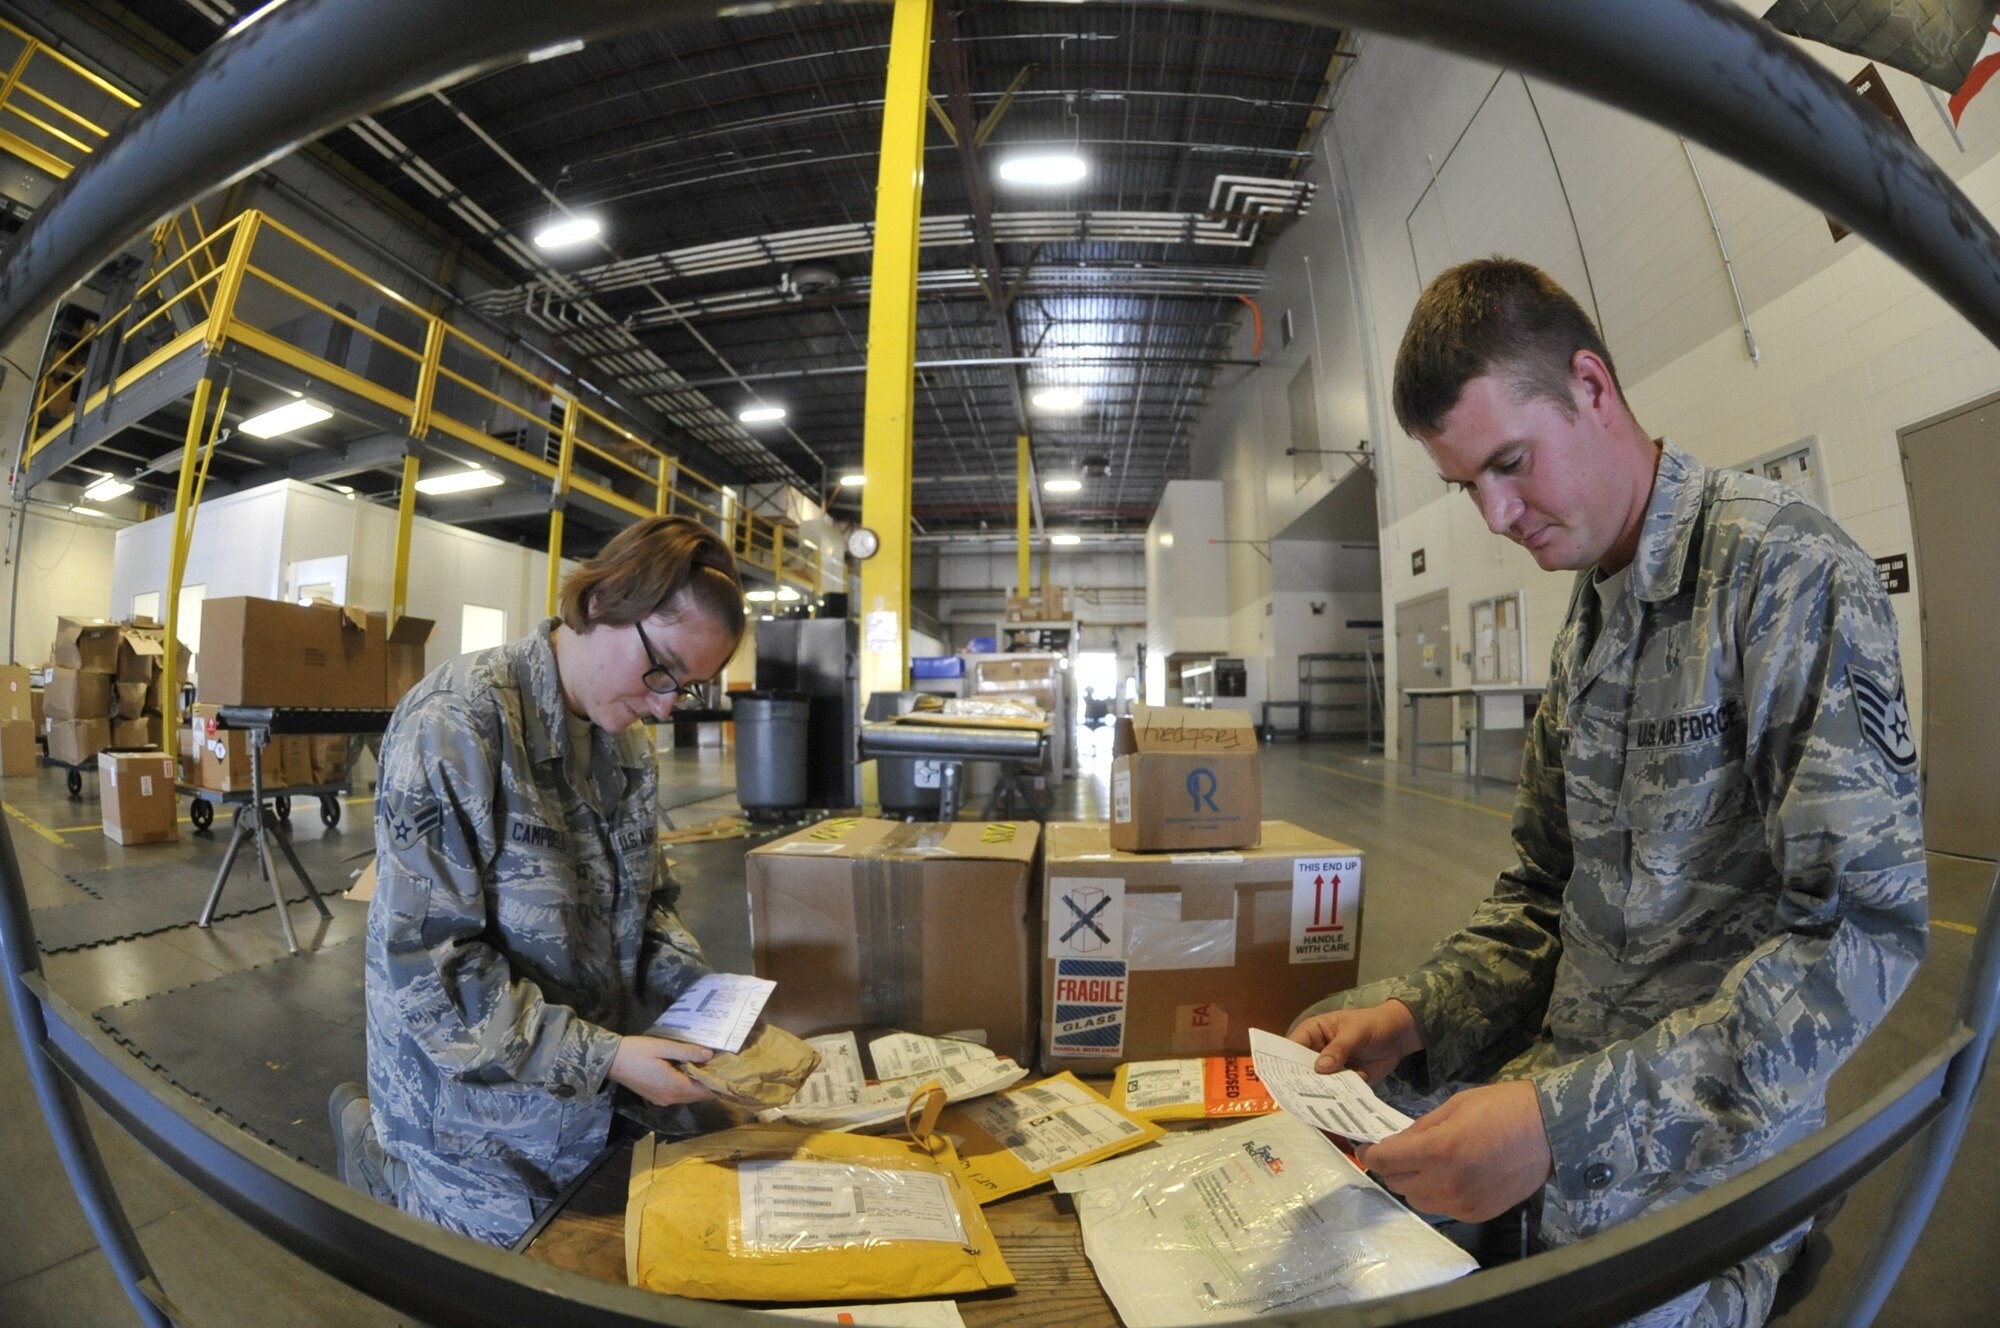 U.S. Air Force Airman 1st Class Hannah Campbell, left, and U.S. Air Force Staff Sgt. Chris Brockway, 442nd Logistics Readiness Squadron traffic management apprentices, process inbound shipments at Whiteman Air Force Base, Mo., Sept. 18, 2013. Inbound shipments must be processed in a timely manner so base customers can have their assets delivered or picked up. (U.S. Air Force photo by Airman 1st Class Keenan Berry/Released)